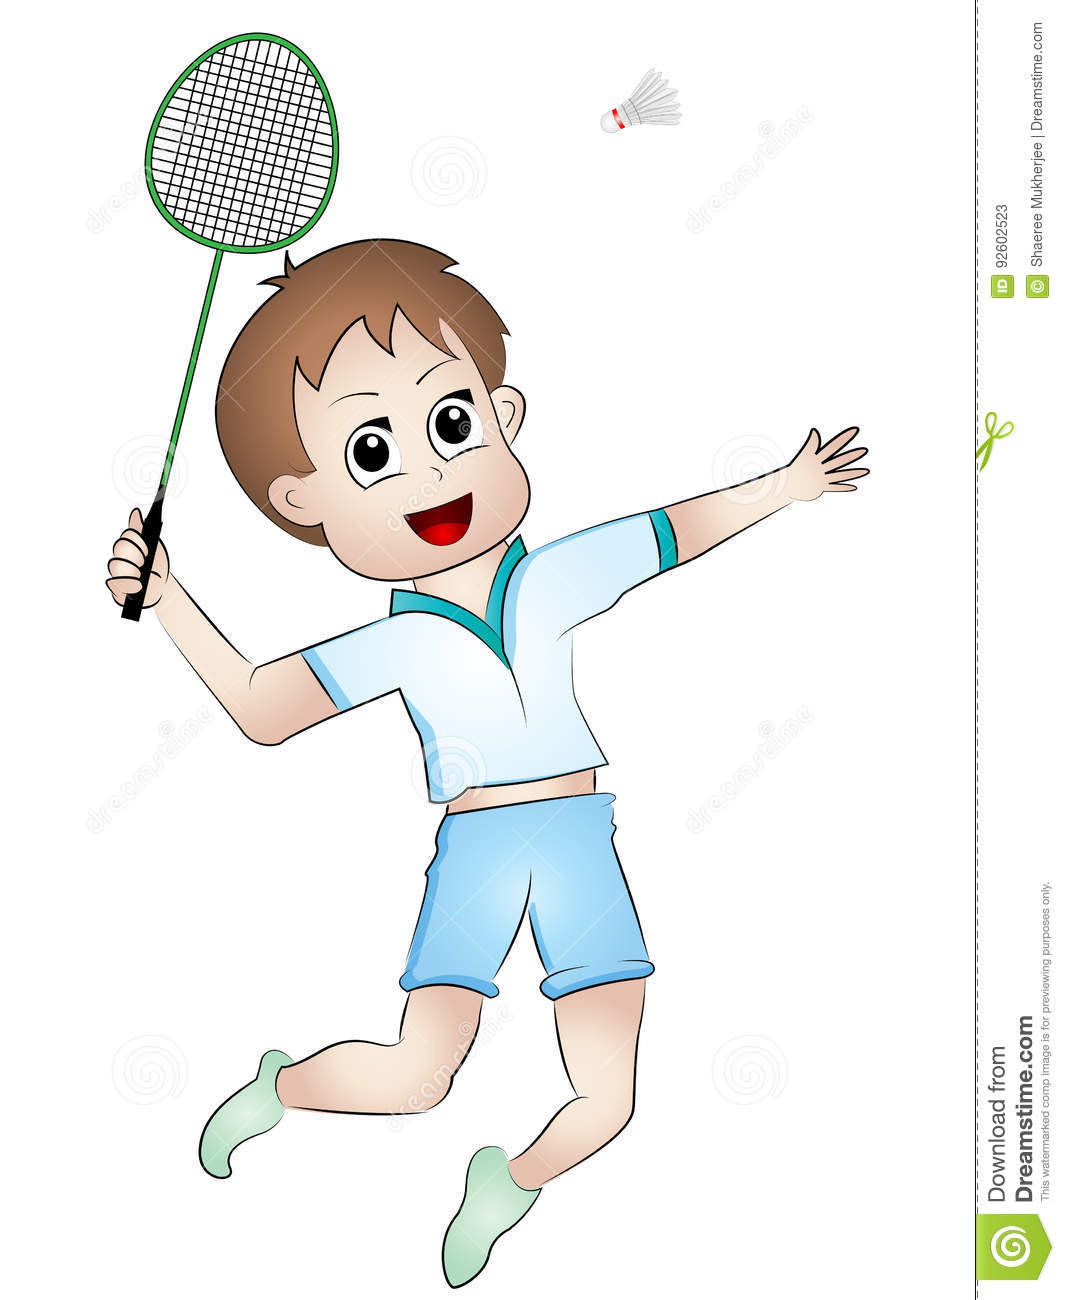 Playing badminton clipart.